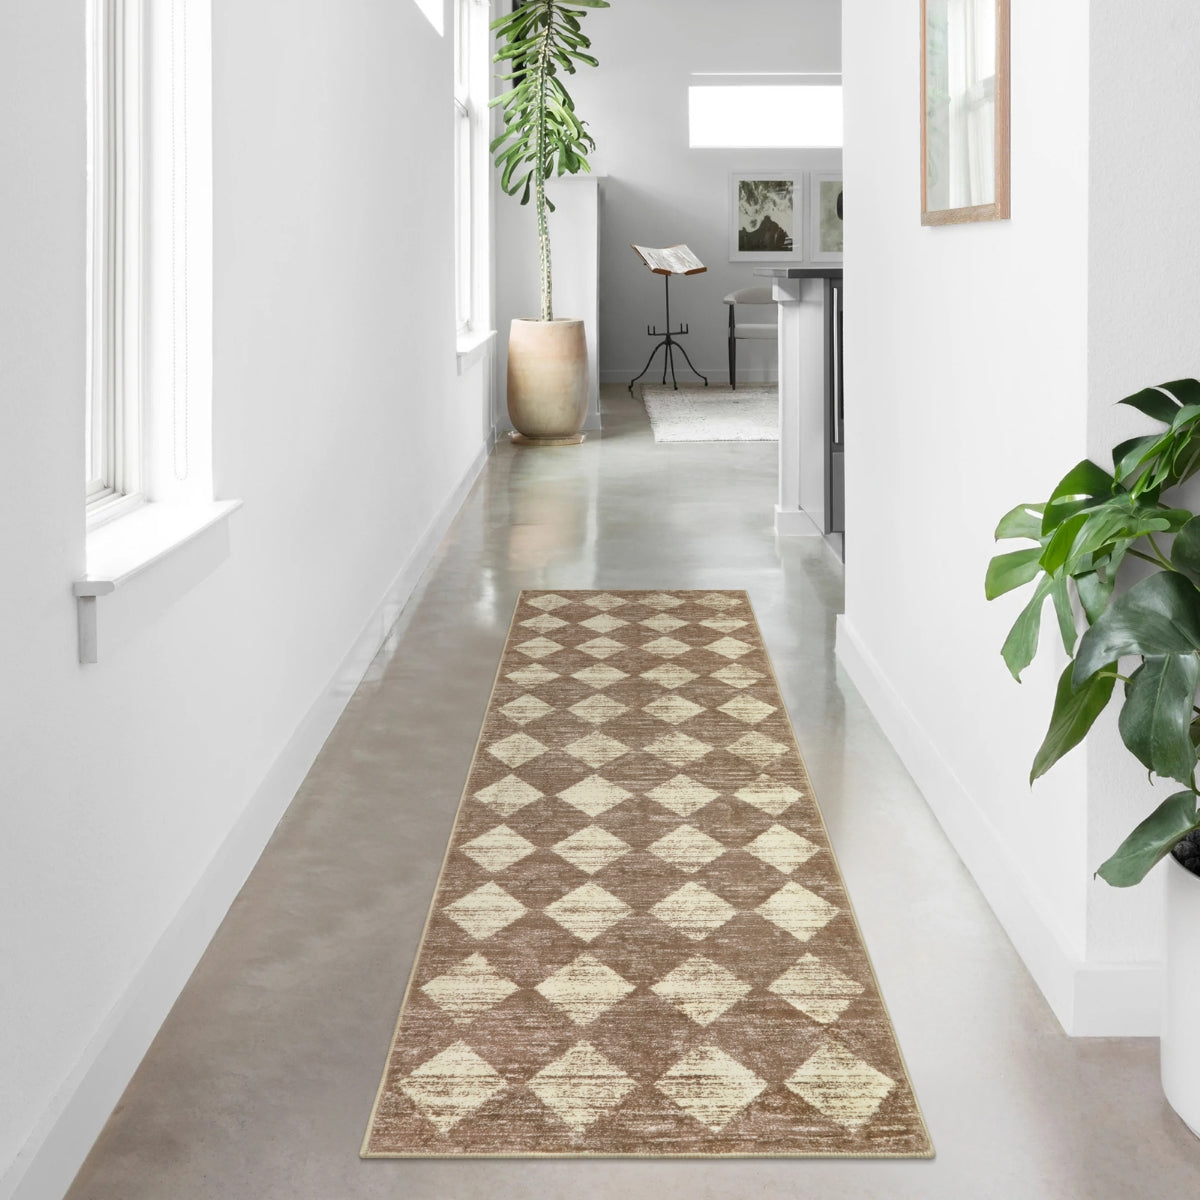 Lahome Moroccan Geometric Area Rug - 2x3 Small Beige Front Door Mat  Washable Kitchen Rug, Farmhouse Soft Non Slip Indoor Floor Throw Carpet for